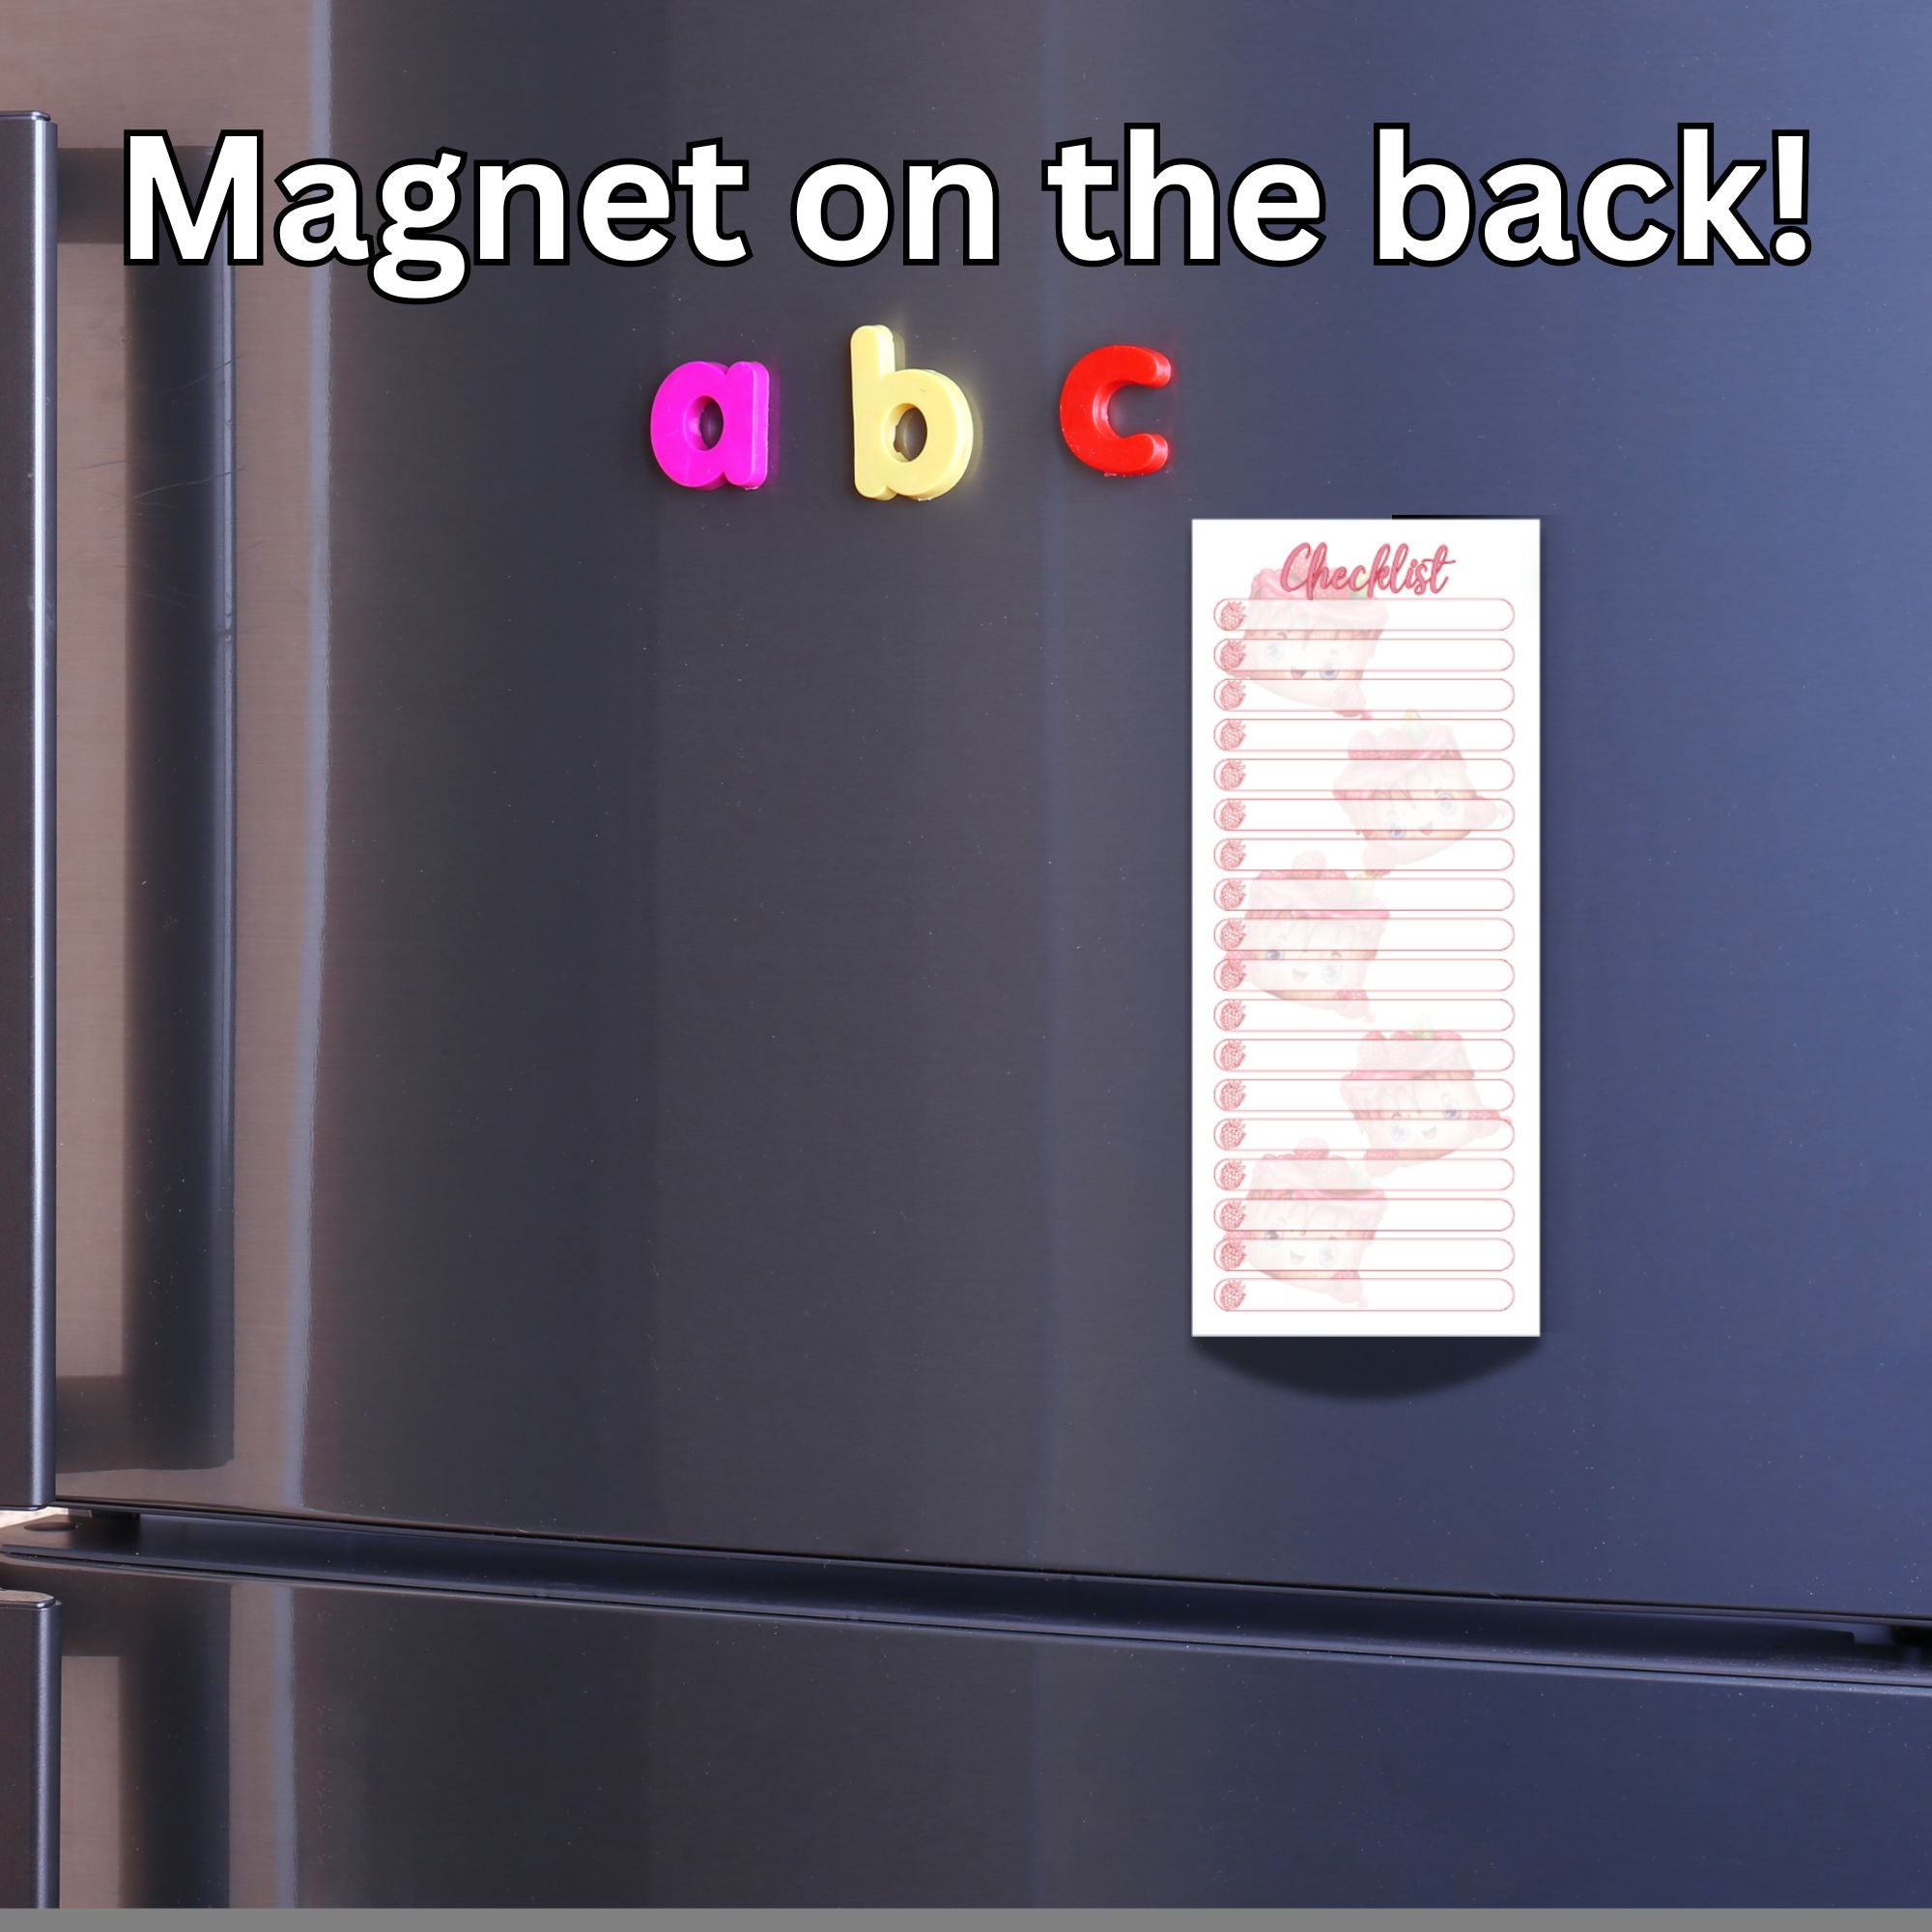 This image shows the Checklist Notepad - Raspberry Cakes on the front of a refigerator.